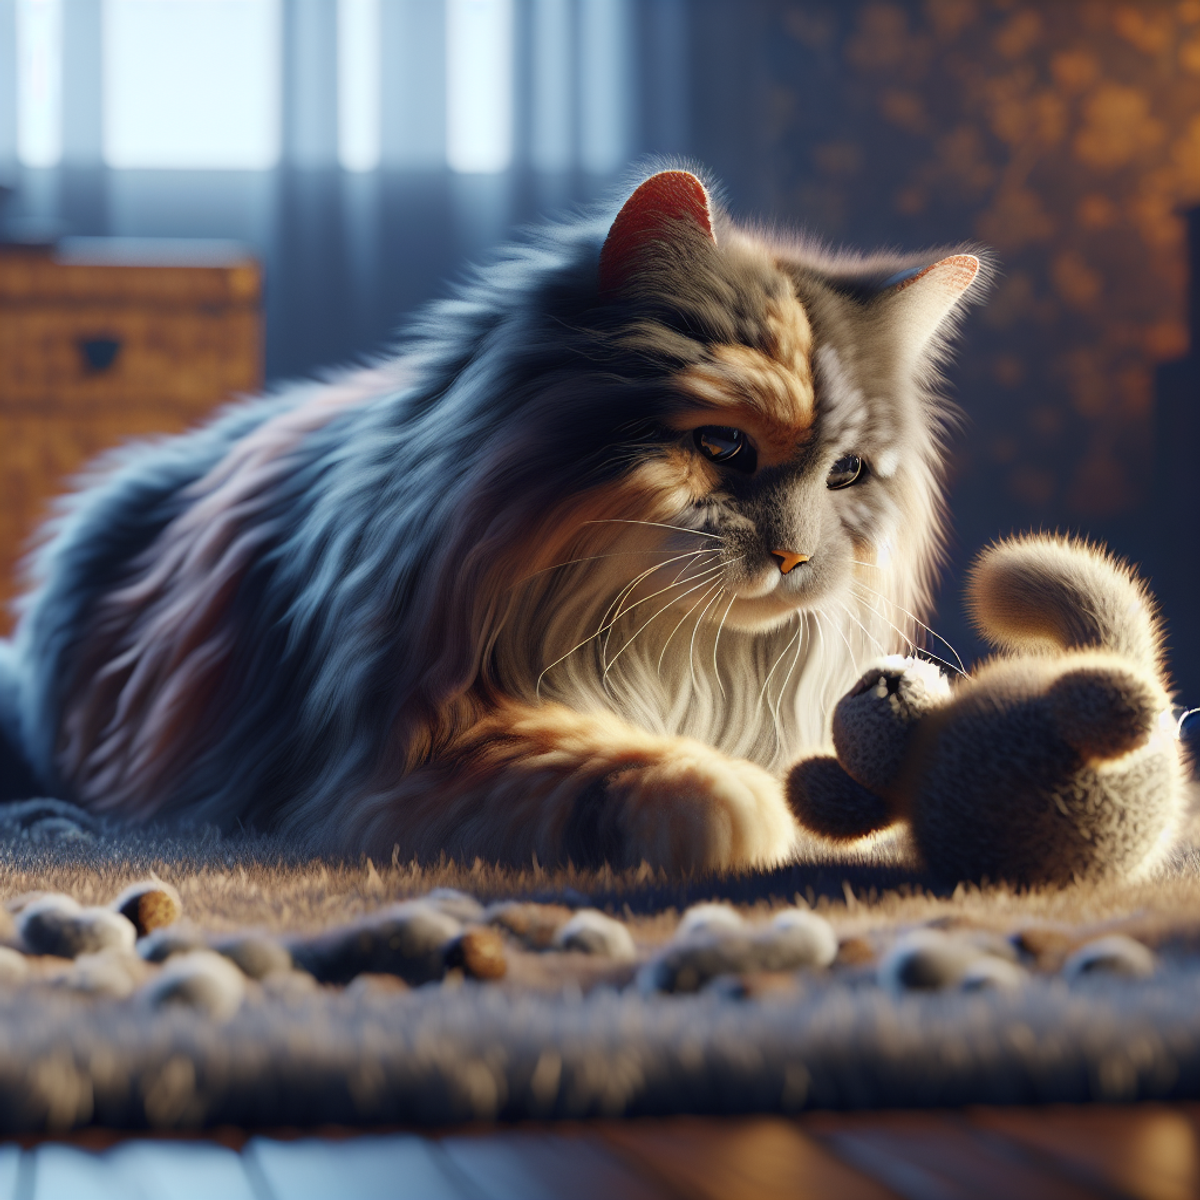 An elderly cat playing with a plush toy in a cozy indoor setting.